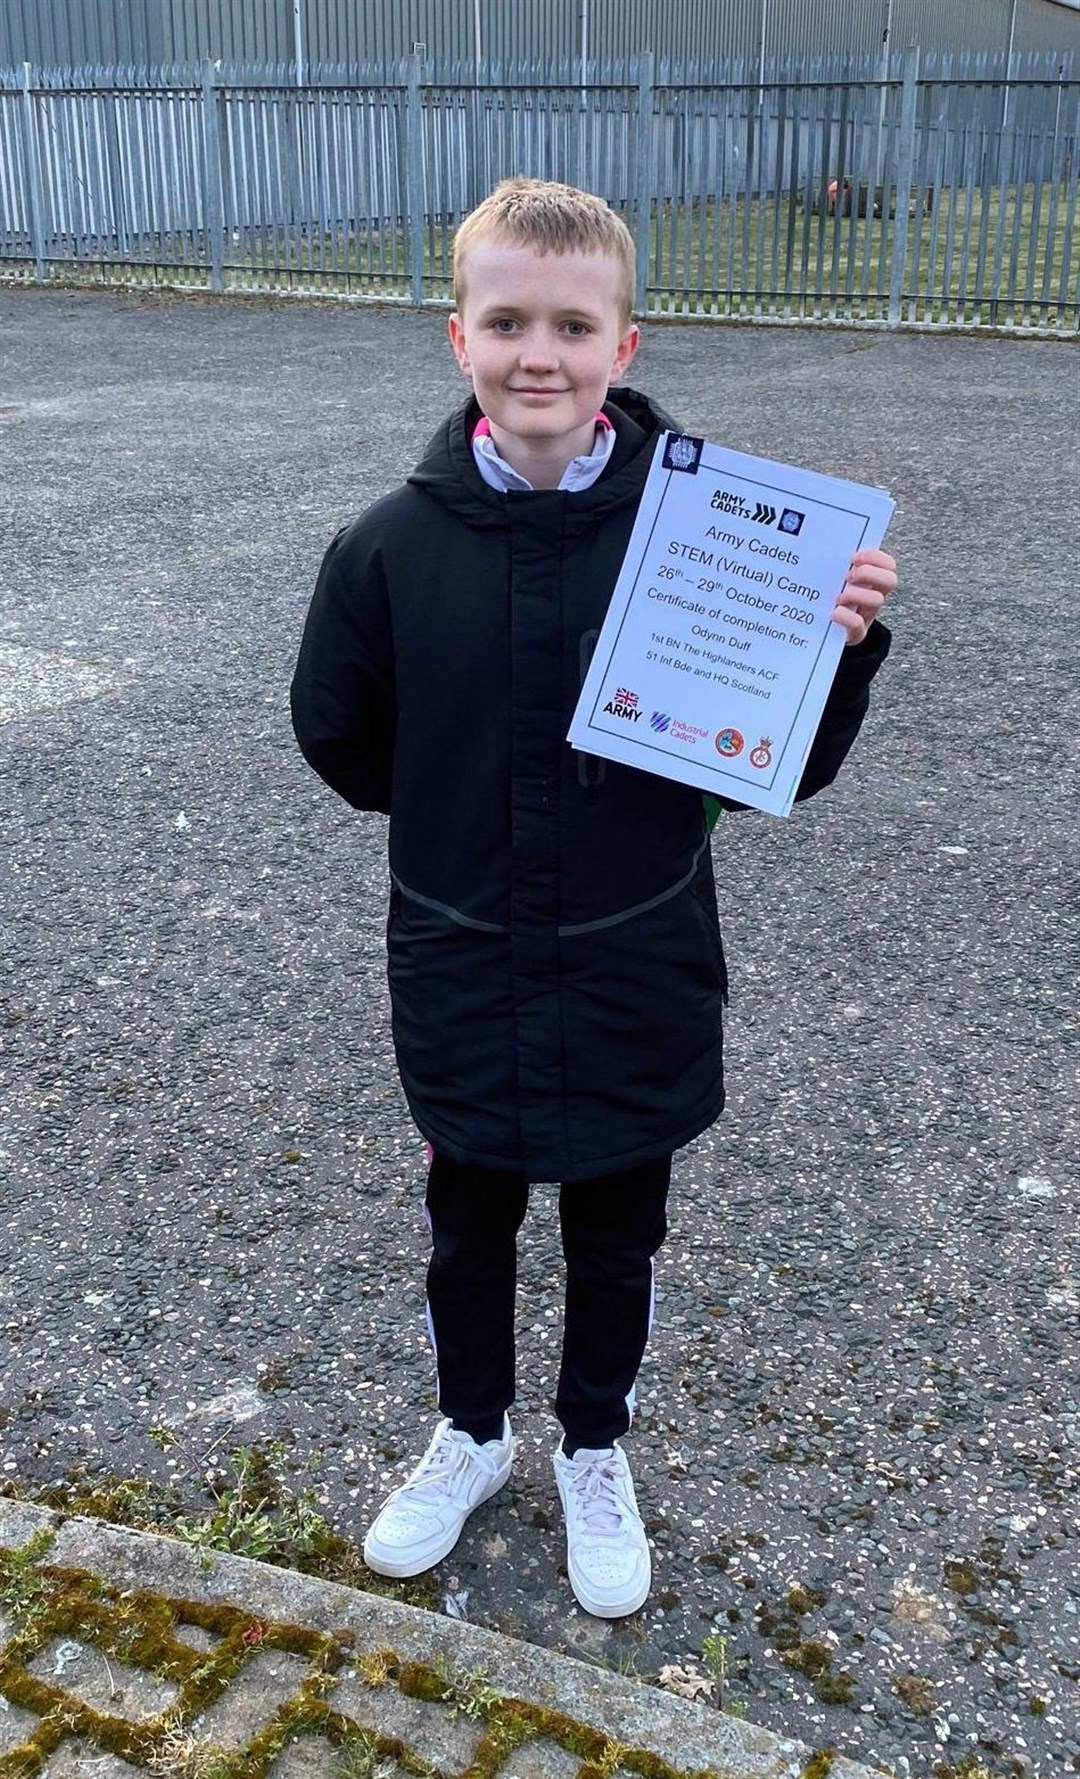 Cadet Odynn Duff was presented with a certificate for attending the Army Cadets' virtual STEM camp in October last year.